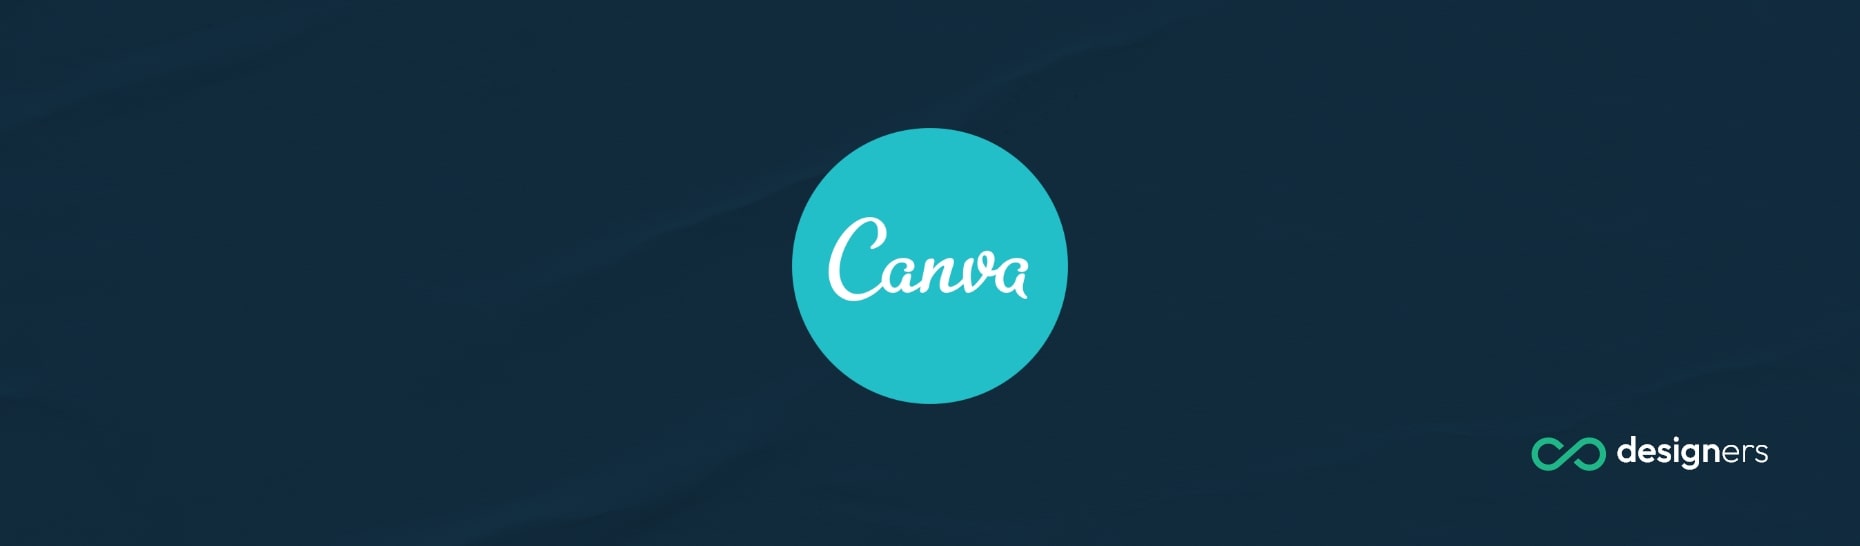 Does Canva Have Courses?